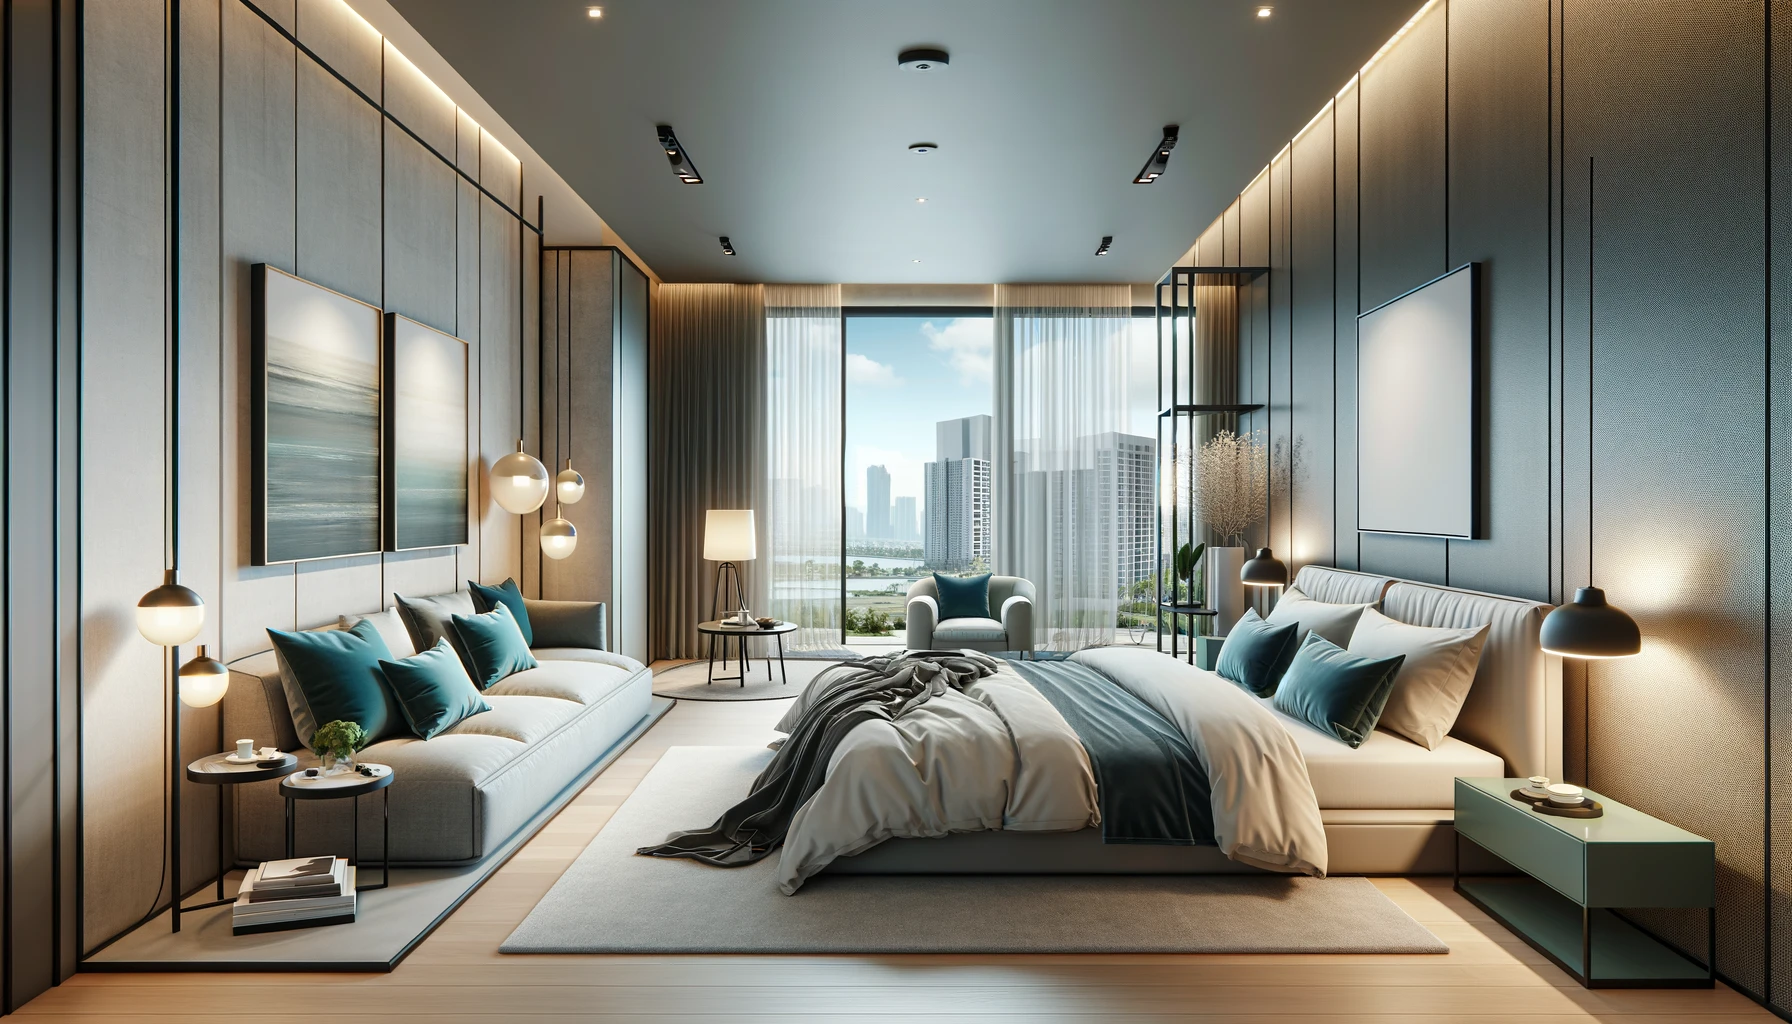 A modern and stylish bedroom design that seamlessly integrates a living space within its layout